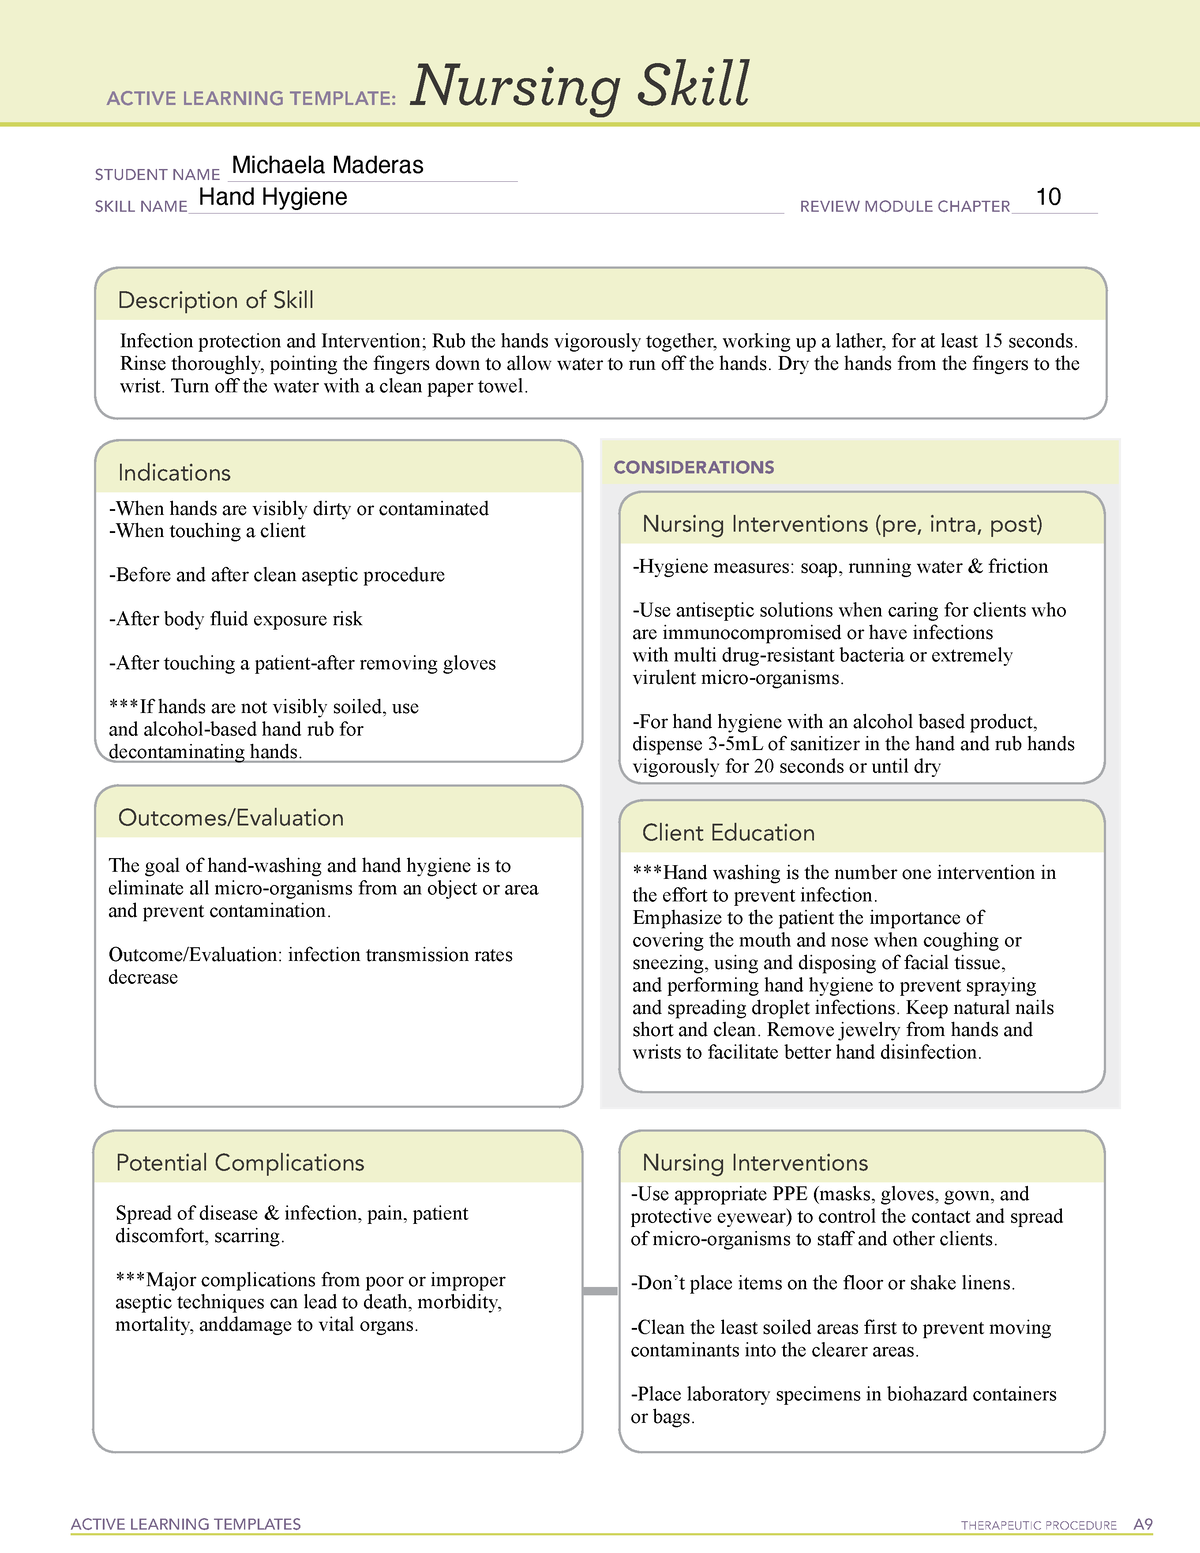 Hand Hygiene ATI active learning template: Nursing skill ACTIVE